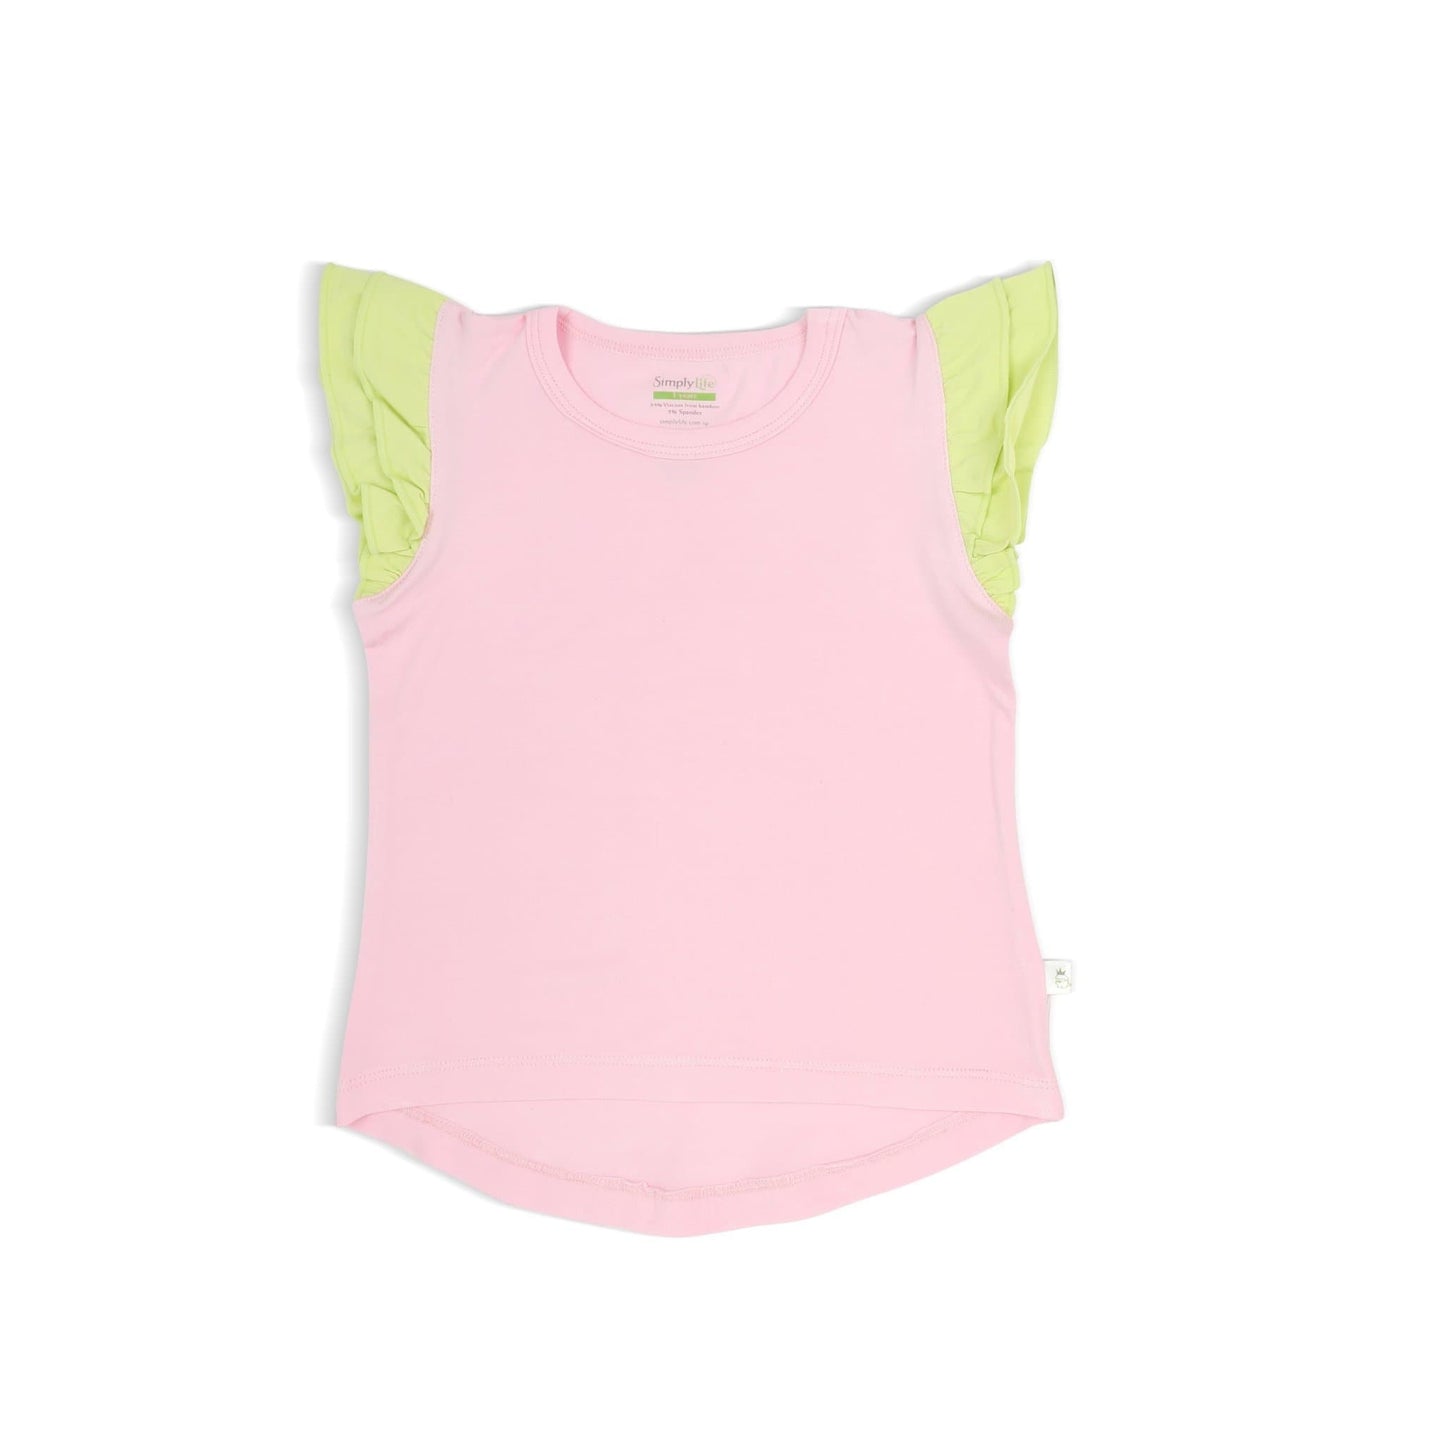 Girls' Frilled Tee - Simply Life